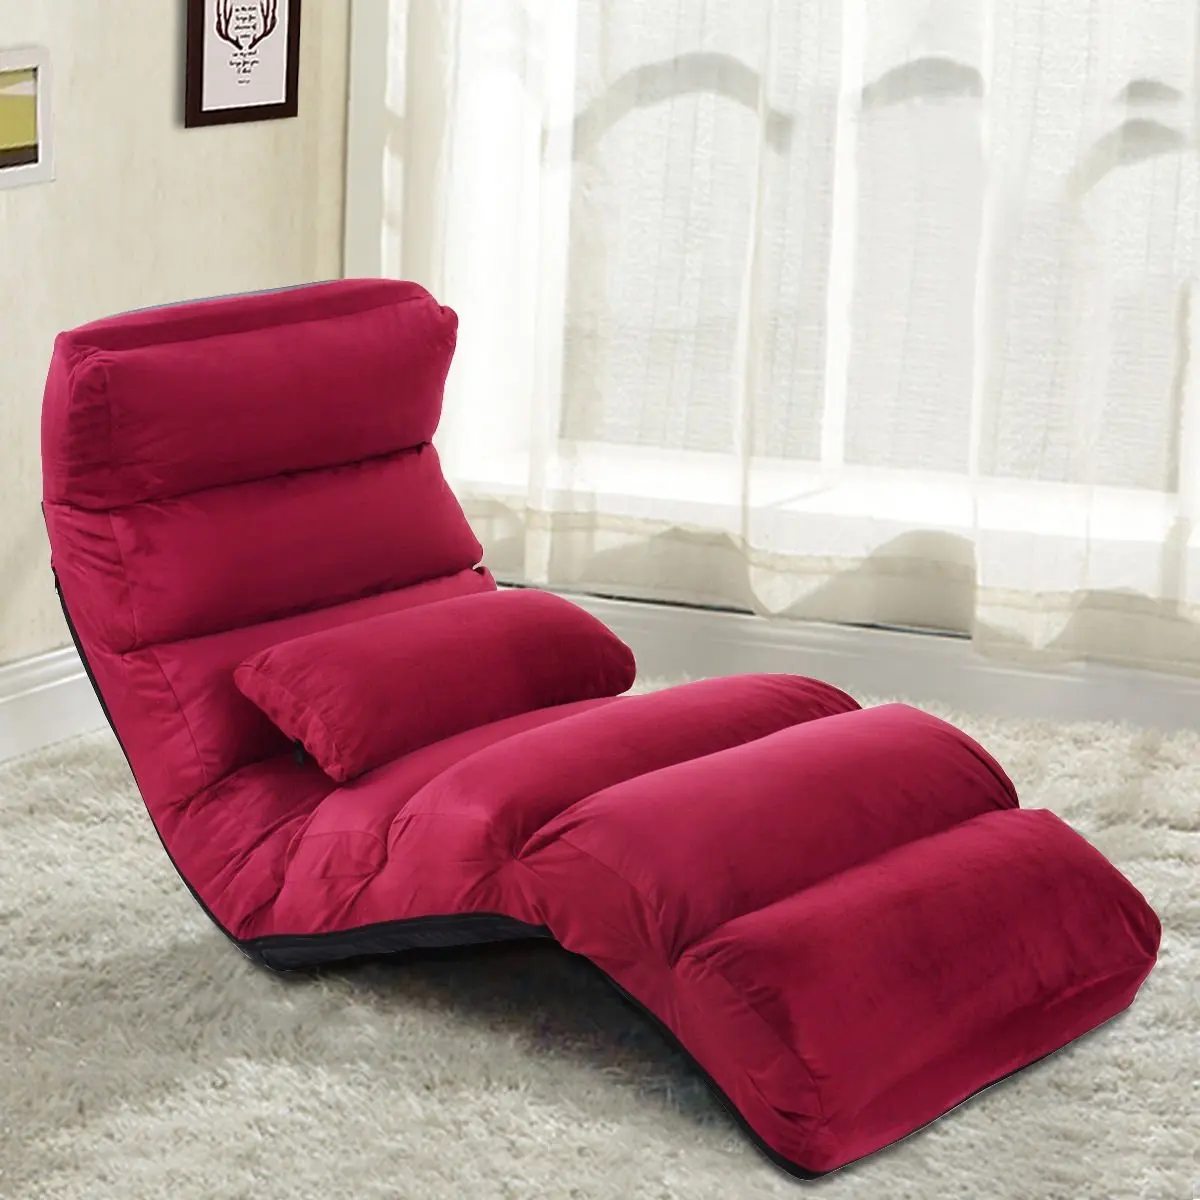 Cheap Lift Chair Lazy Boy, find Lift Chair Lazy Boy deals on line at